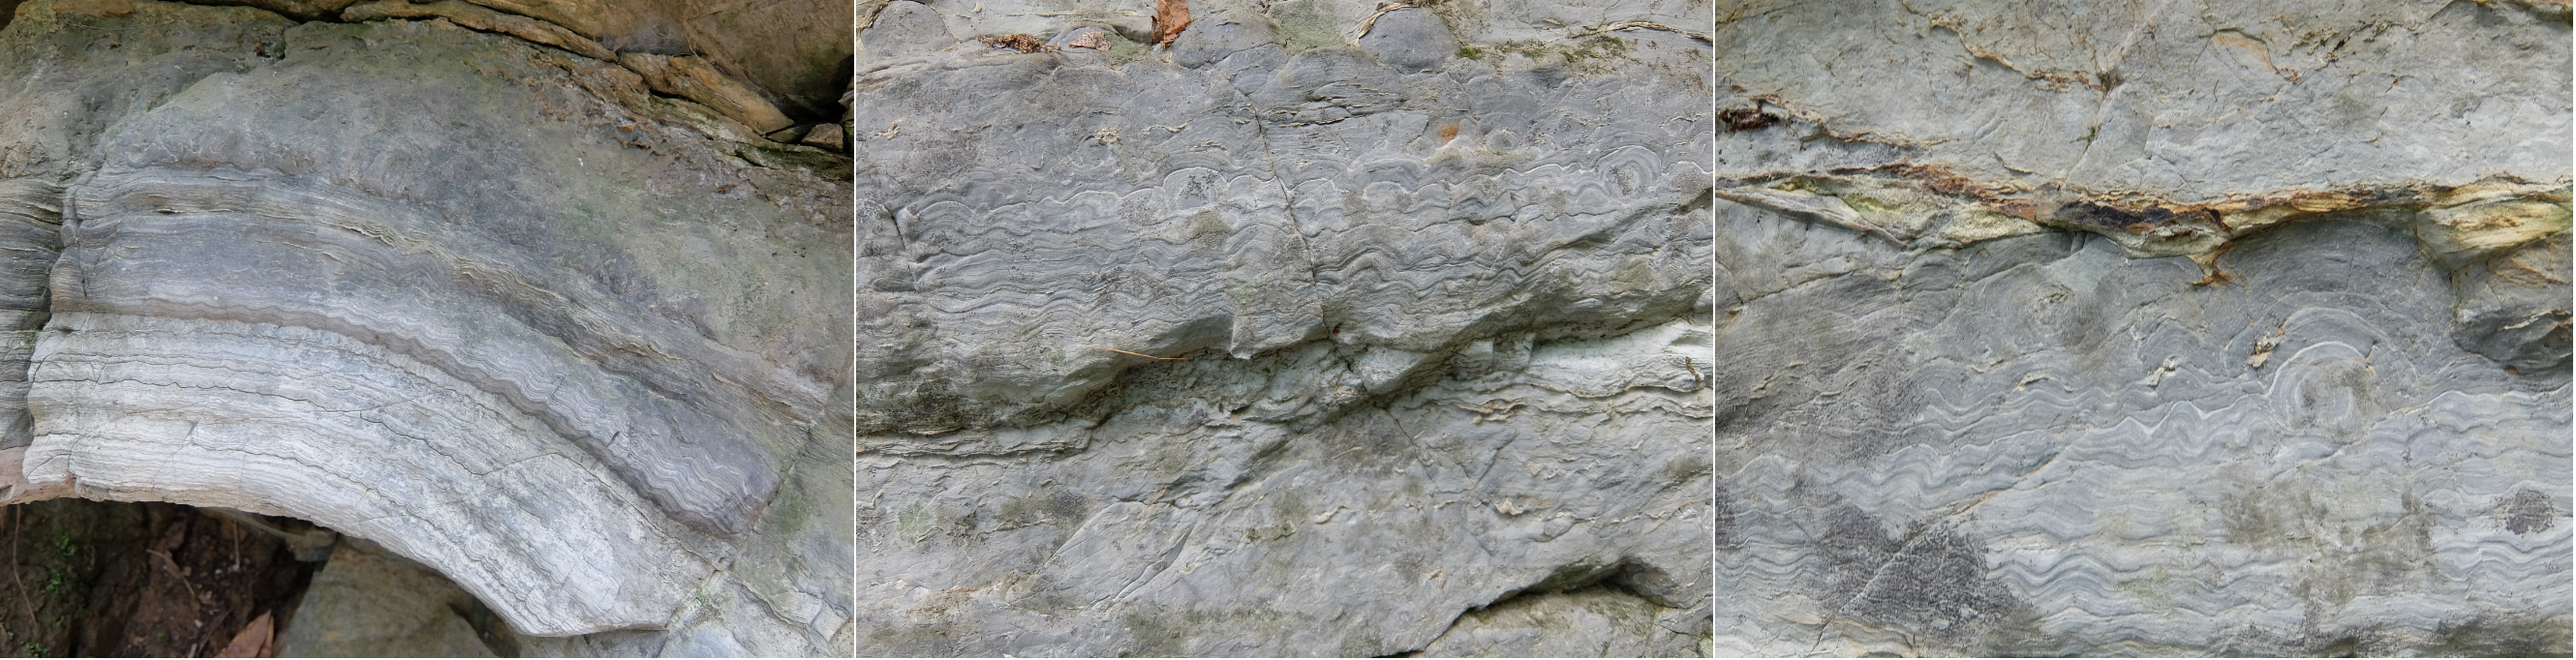 Key fossil-bearing outcrops that have previously suffered from